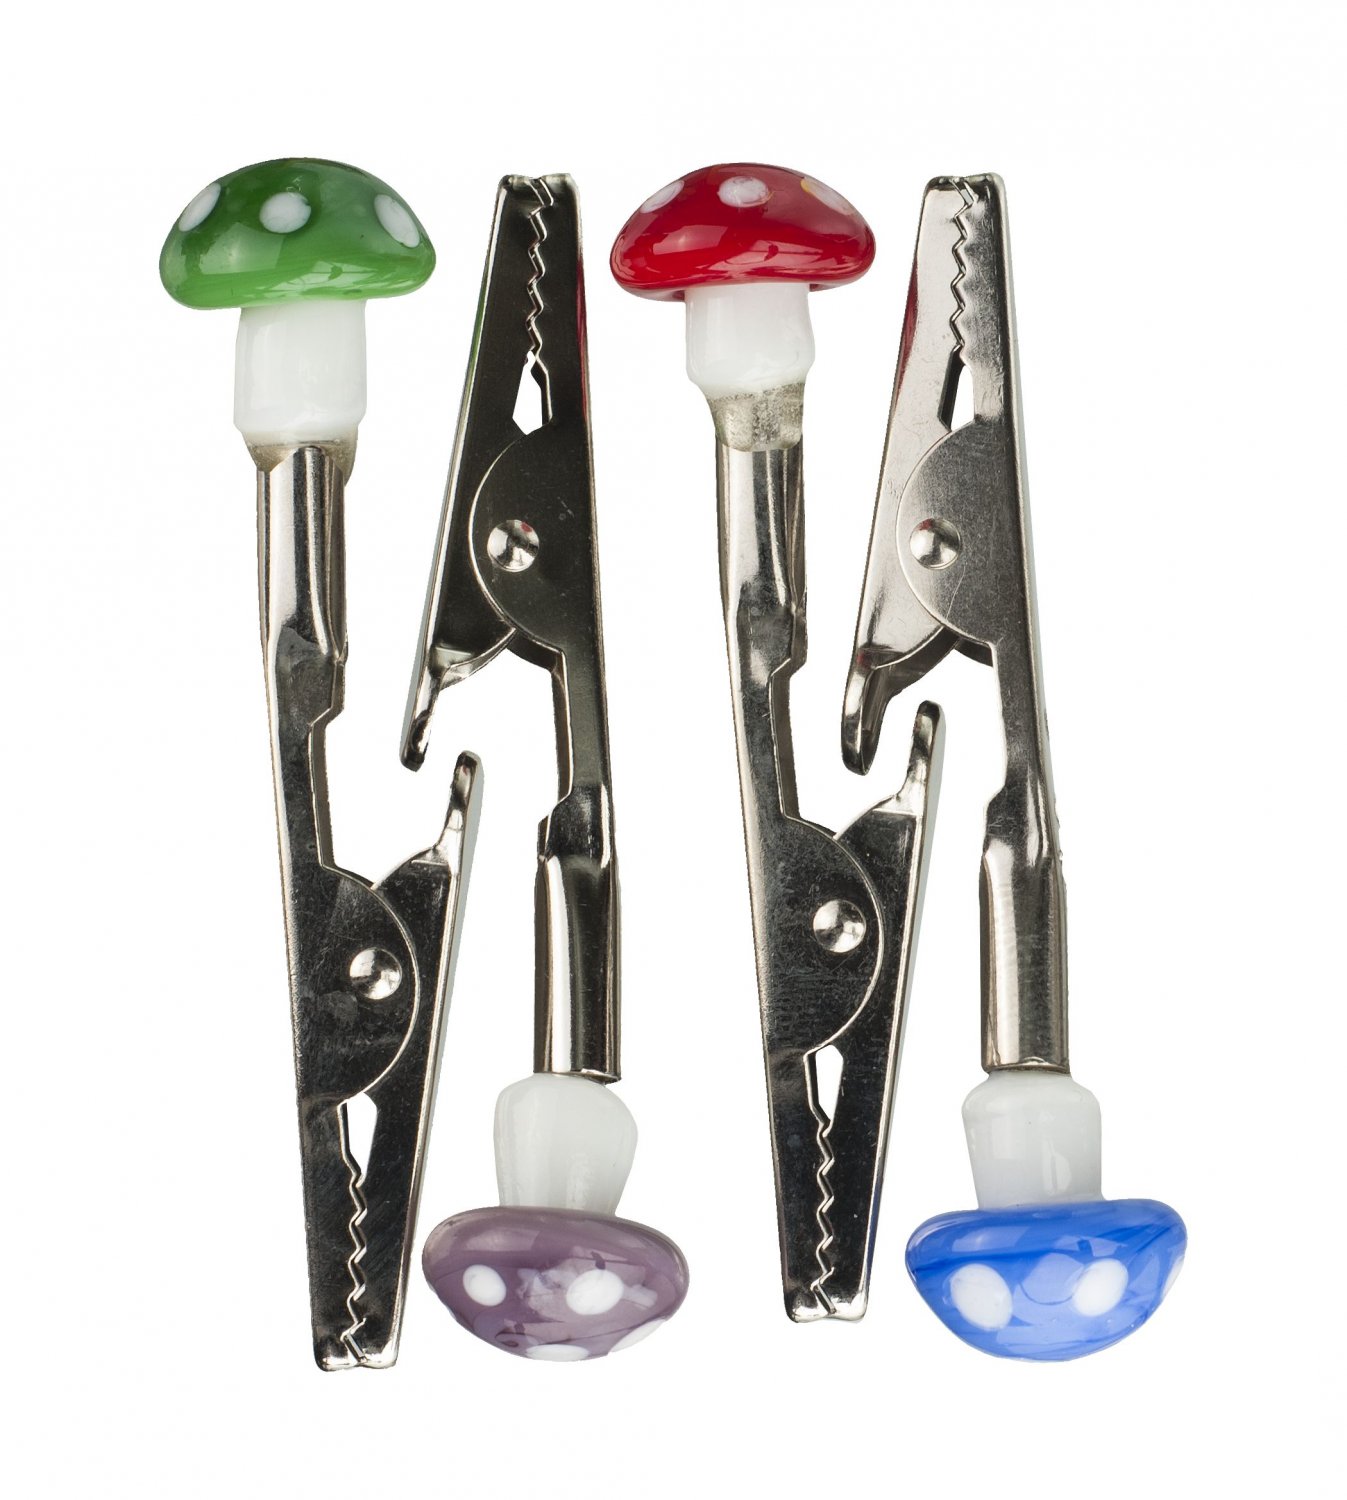 Clips-Mushroom Top Assorted Color Roach Clips #CLIP1